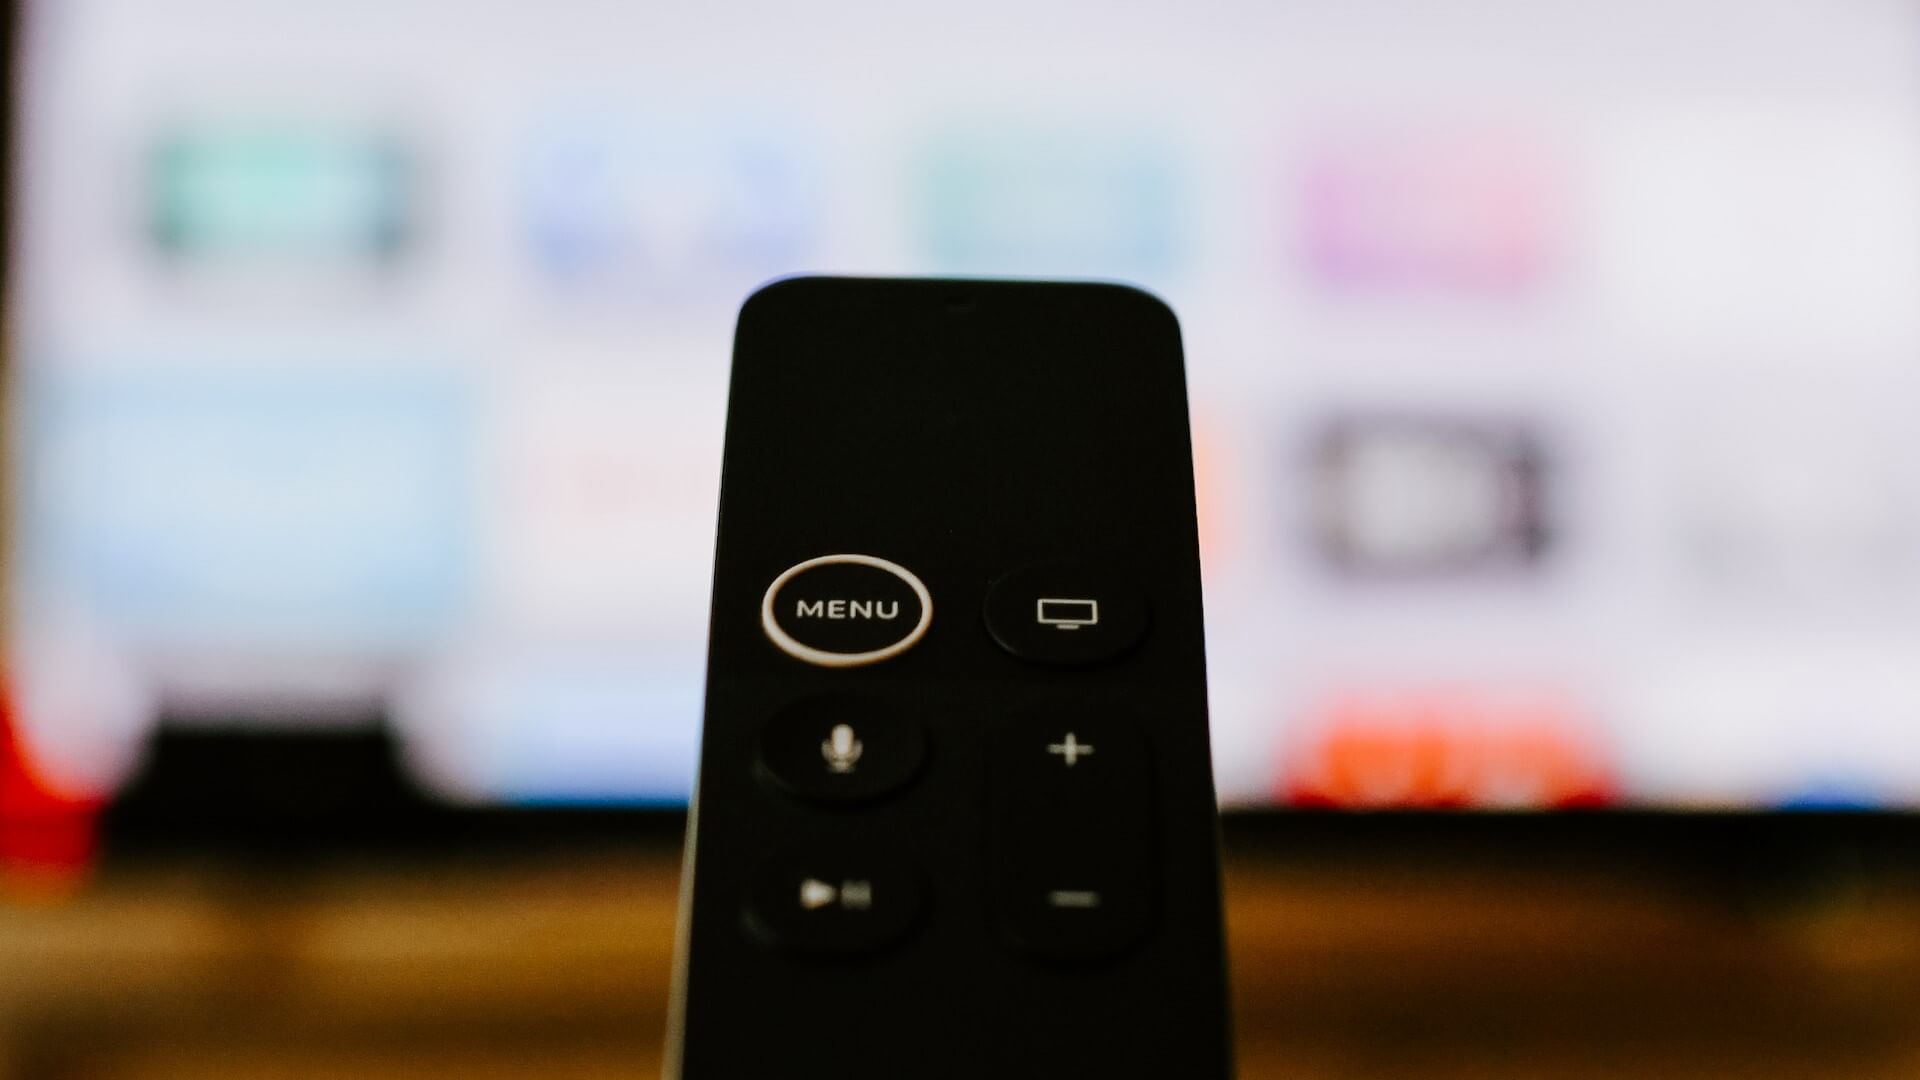 A control remote of a streaming device